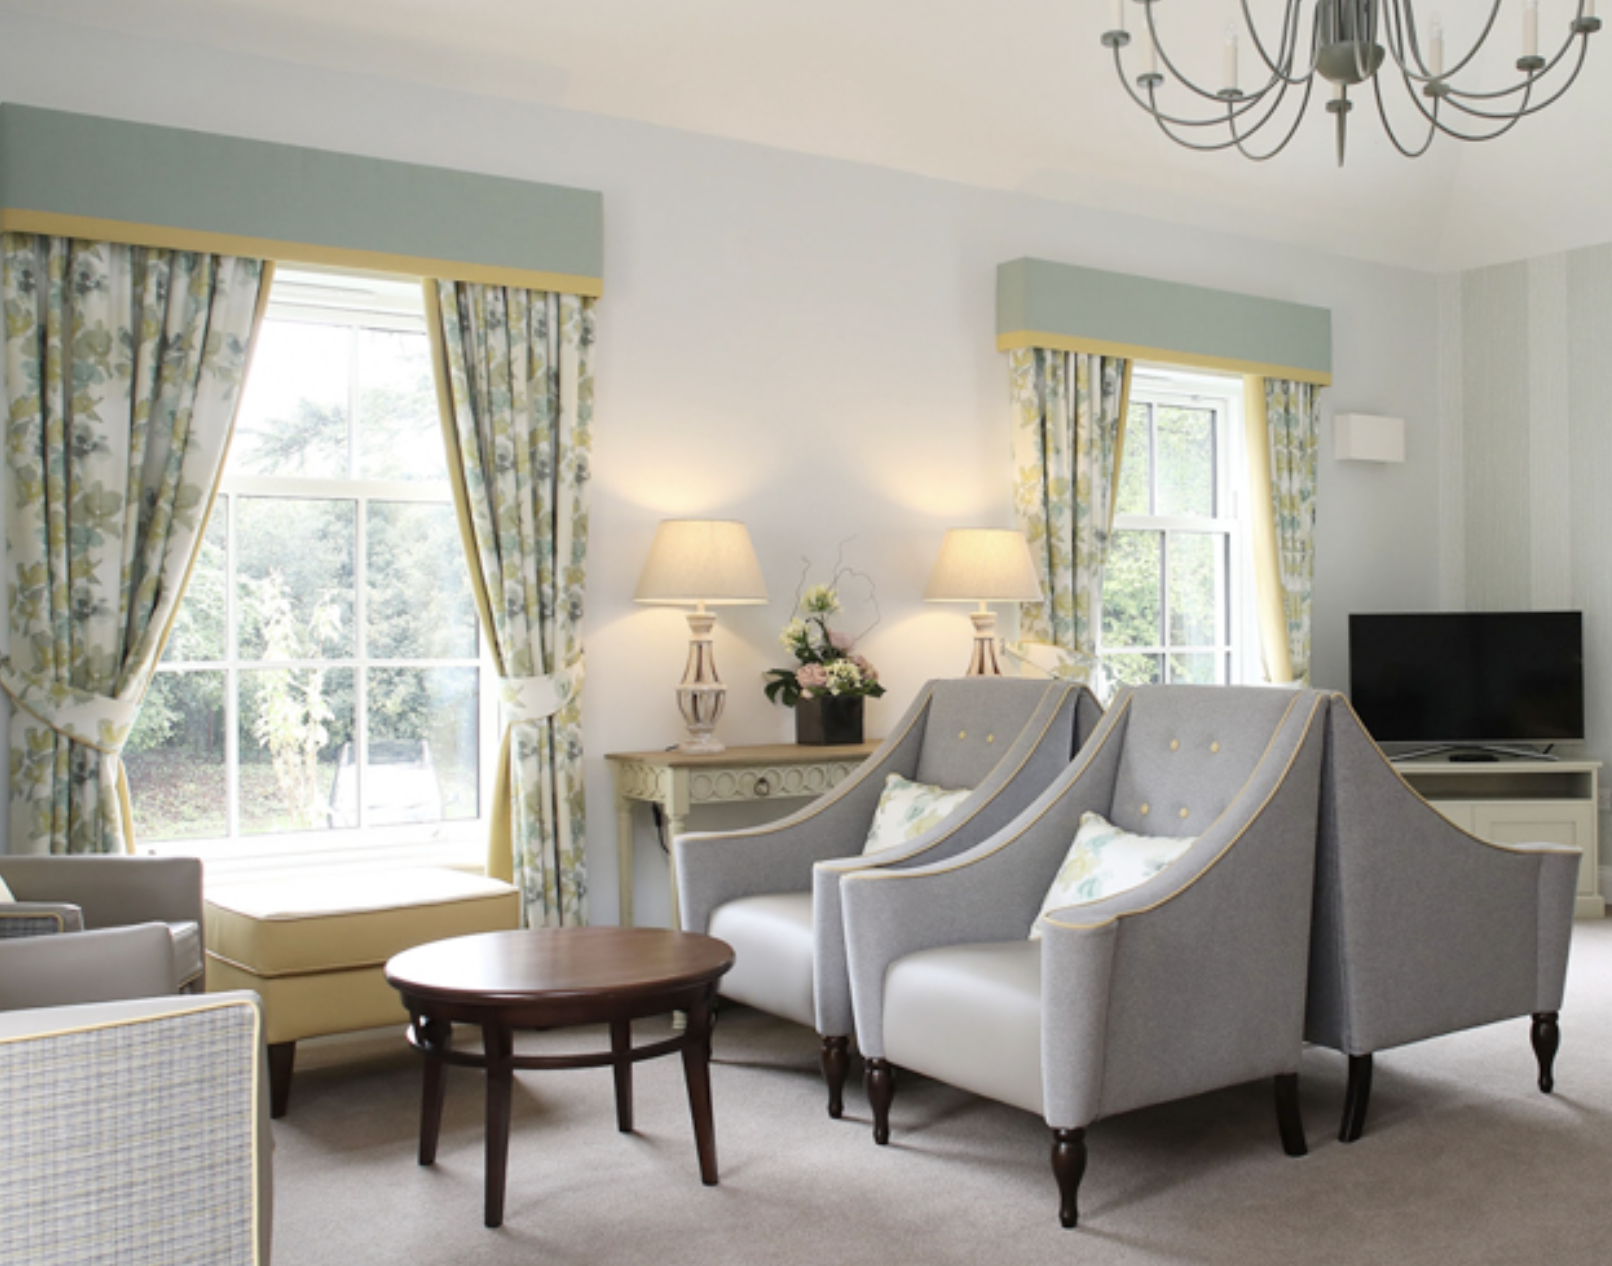 Lounge of Jubilee House care home in Leamington Spa, West Midlands